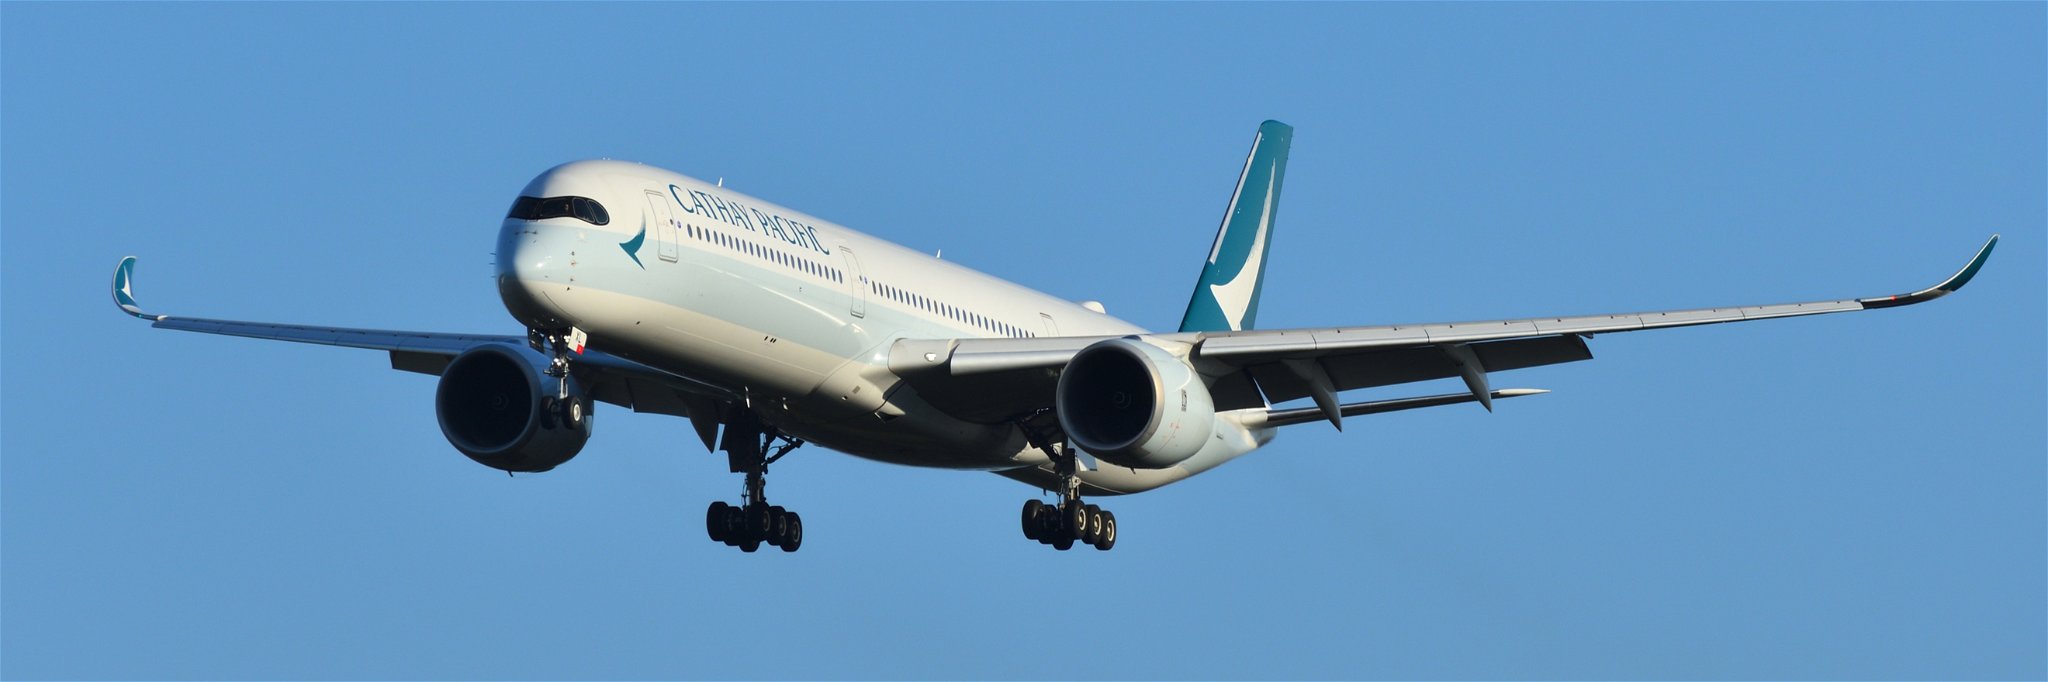 A Cathay Pacific flight prepares to land.